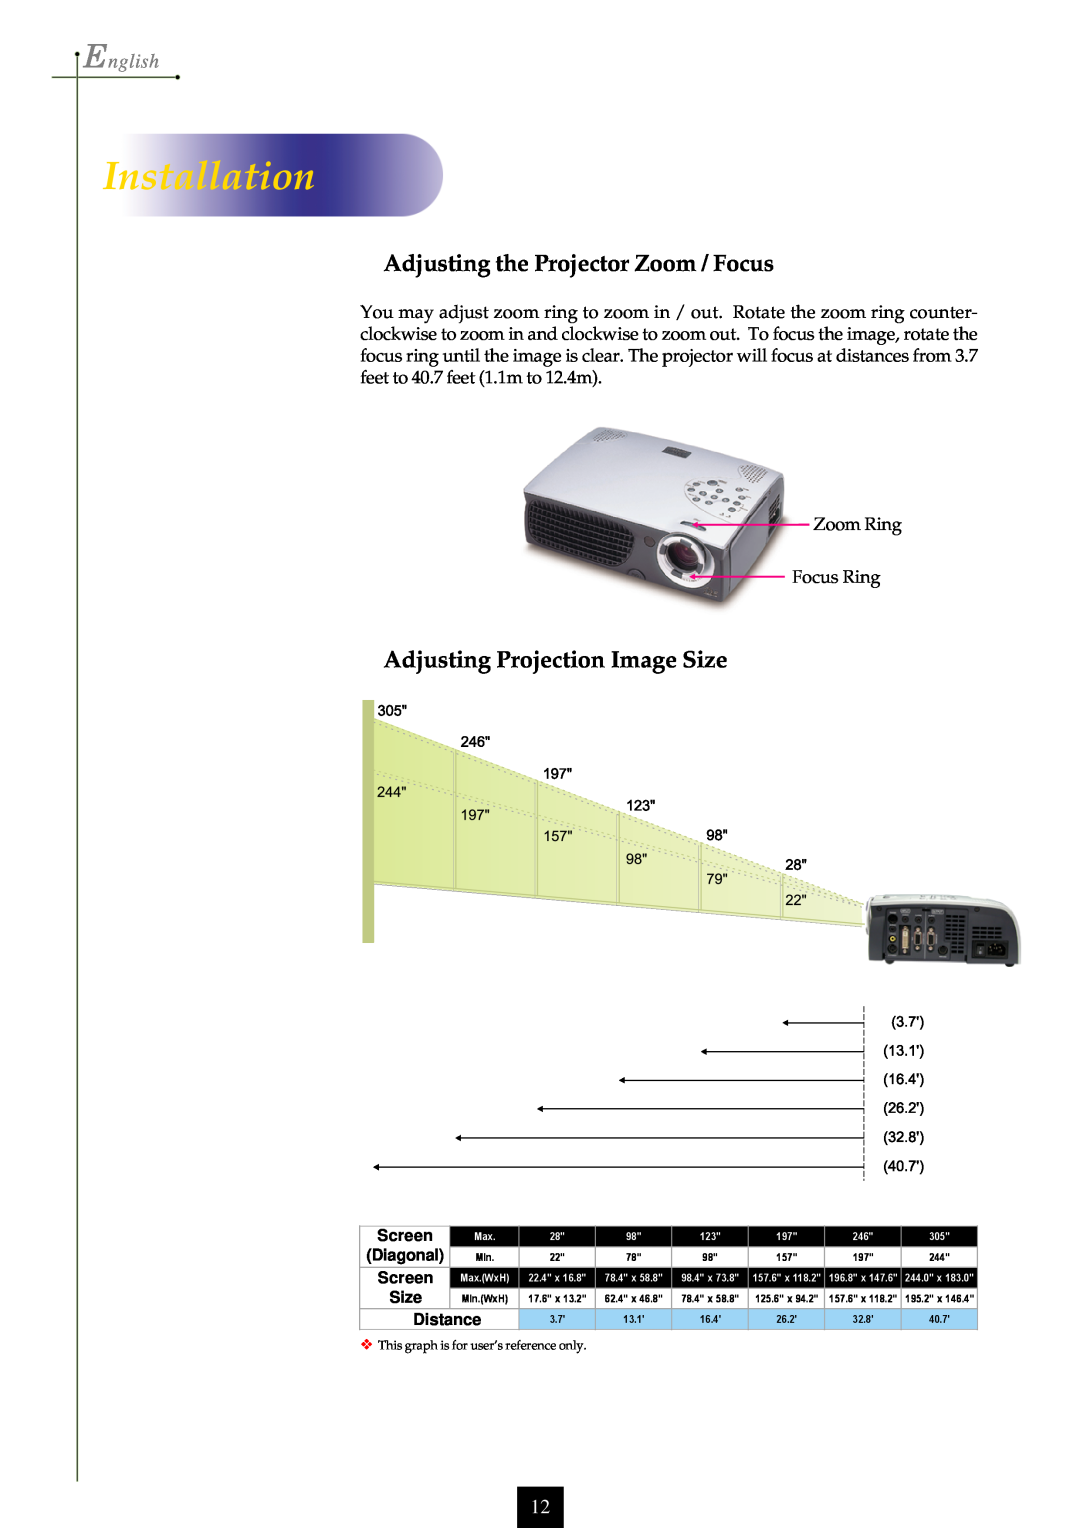 Optoma Technology EP750 Adjusting the Projector Zoom / Focus, Adjusting Projection Image Size, Installation, English 